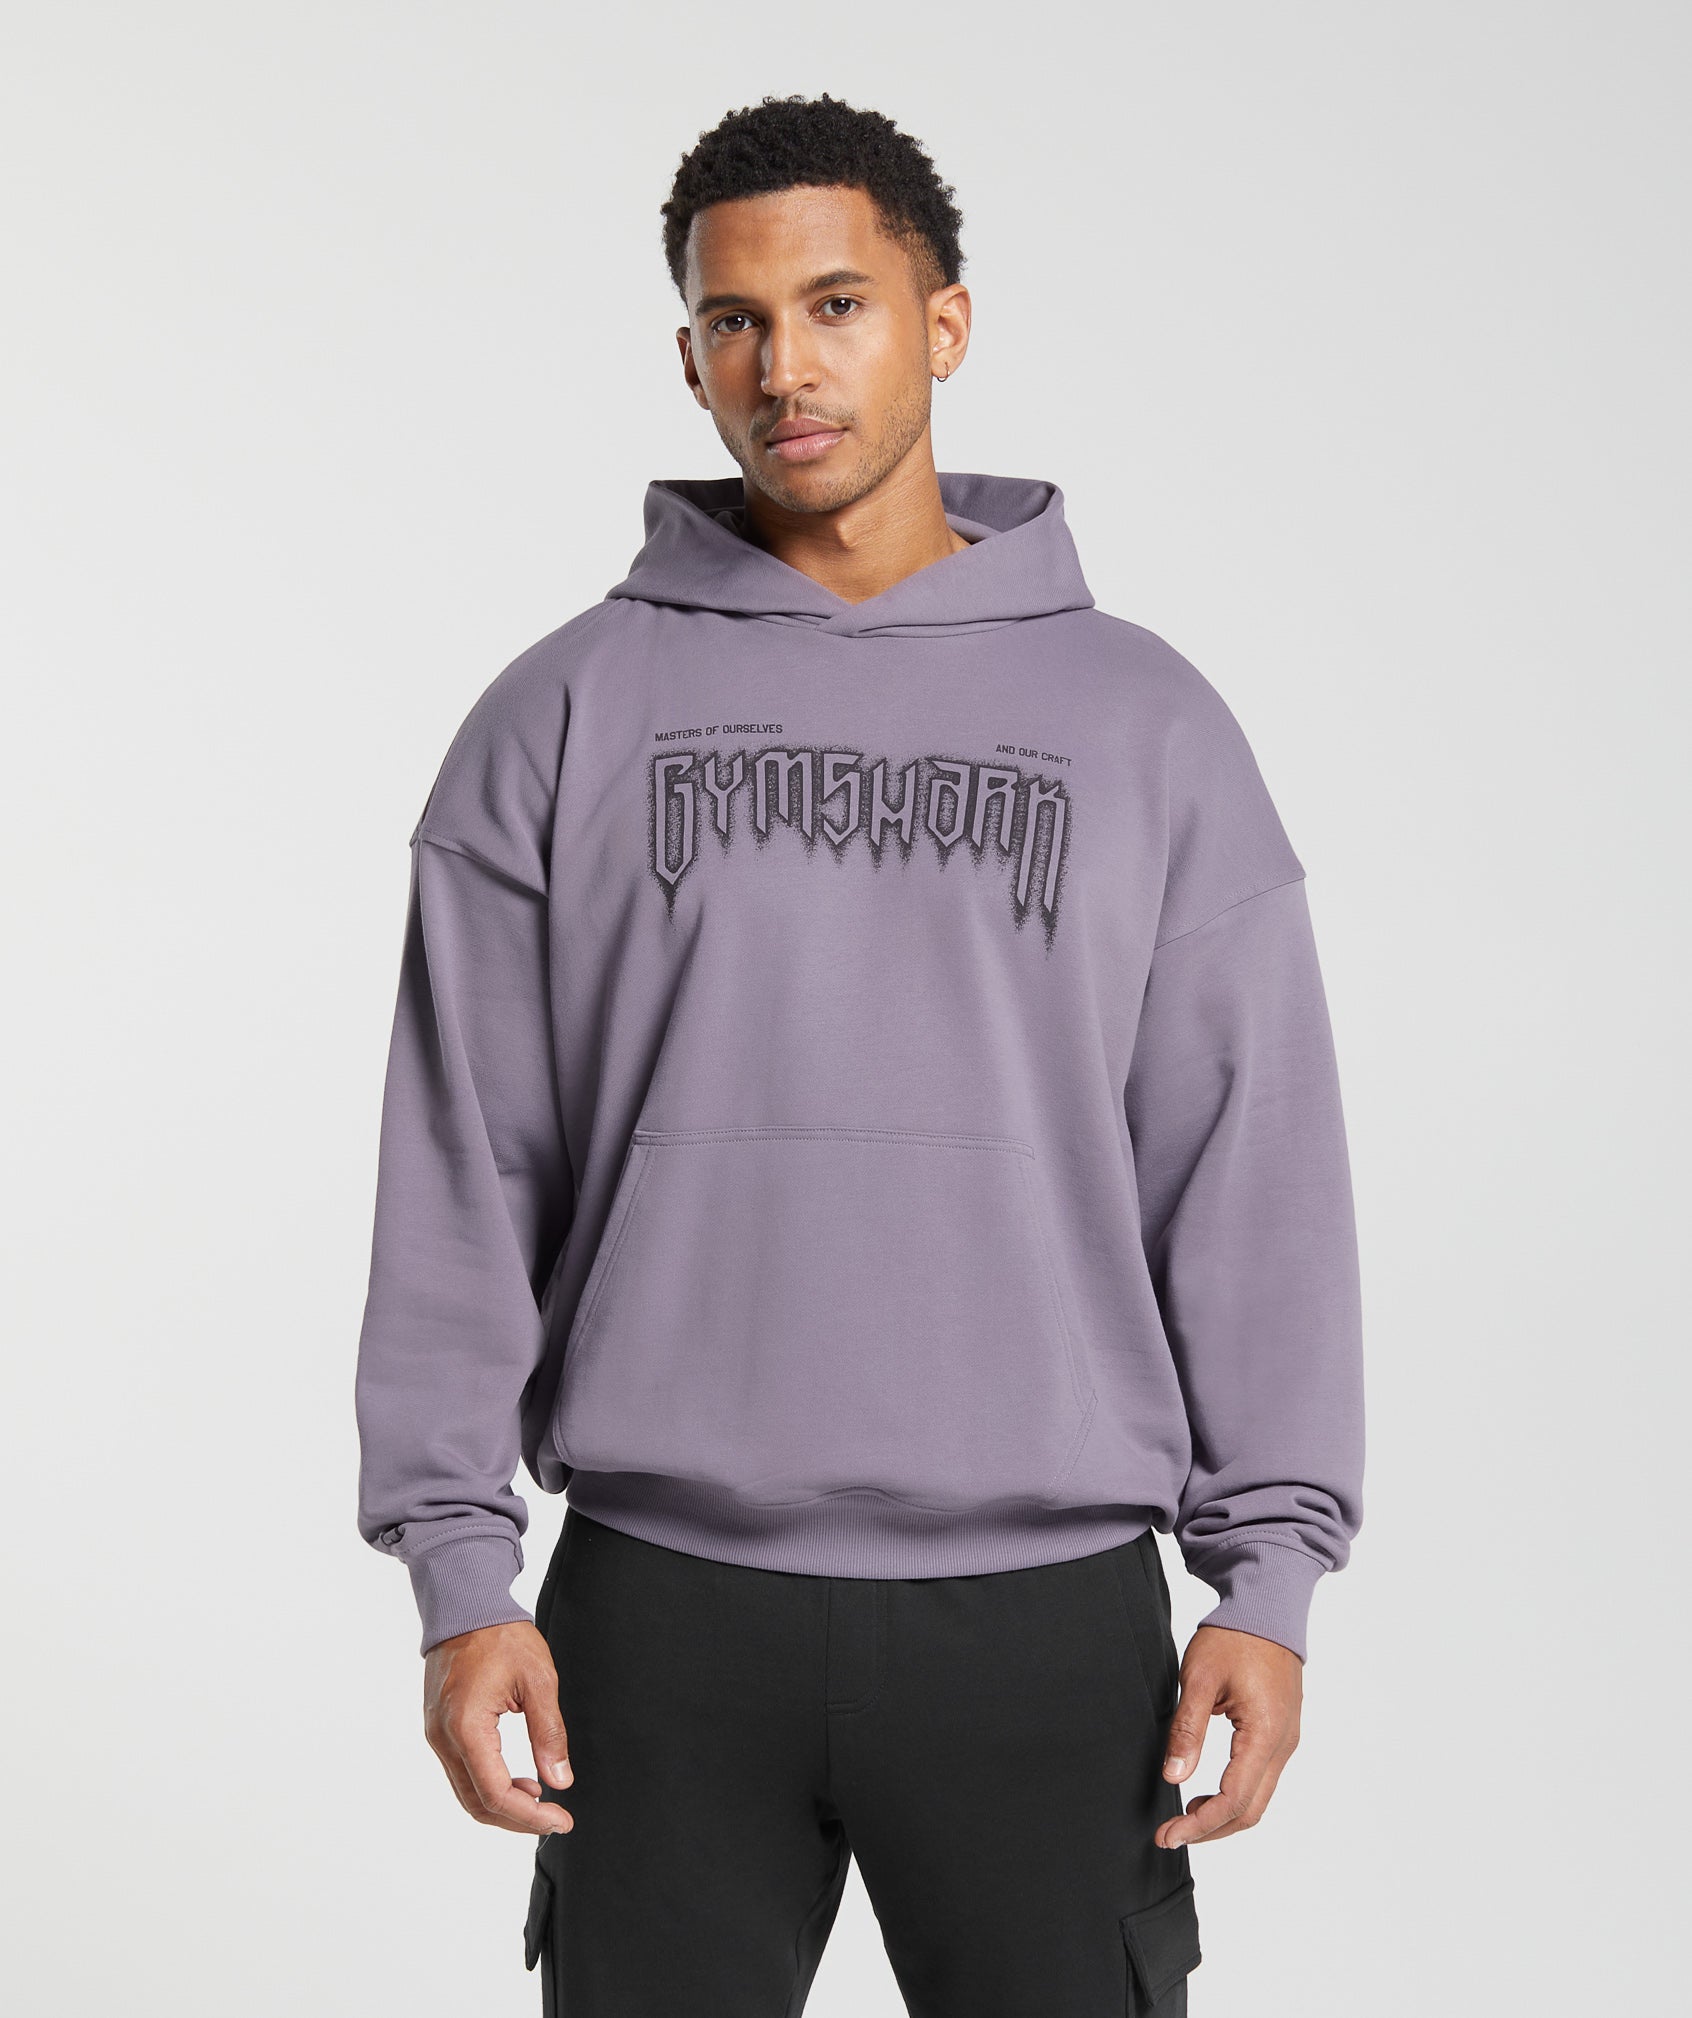 Masters of Our Craft Hoodie in Fog Purple - view 1